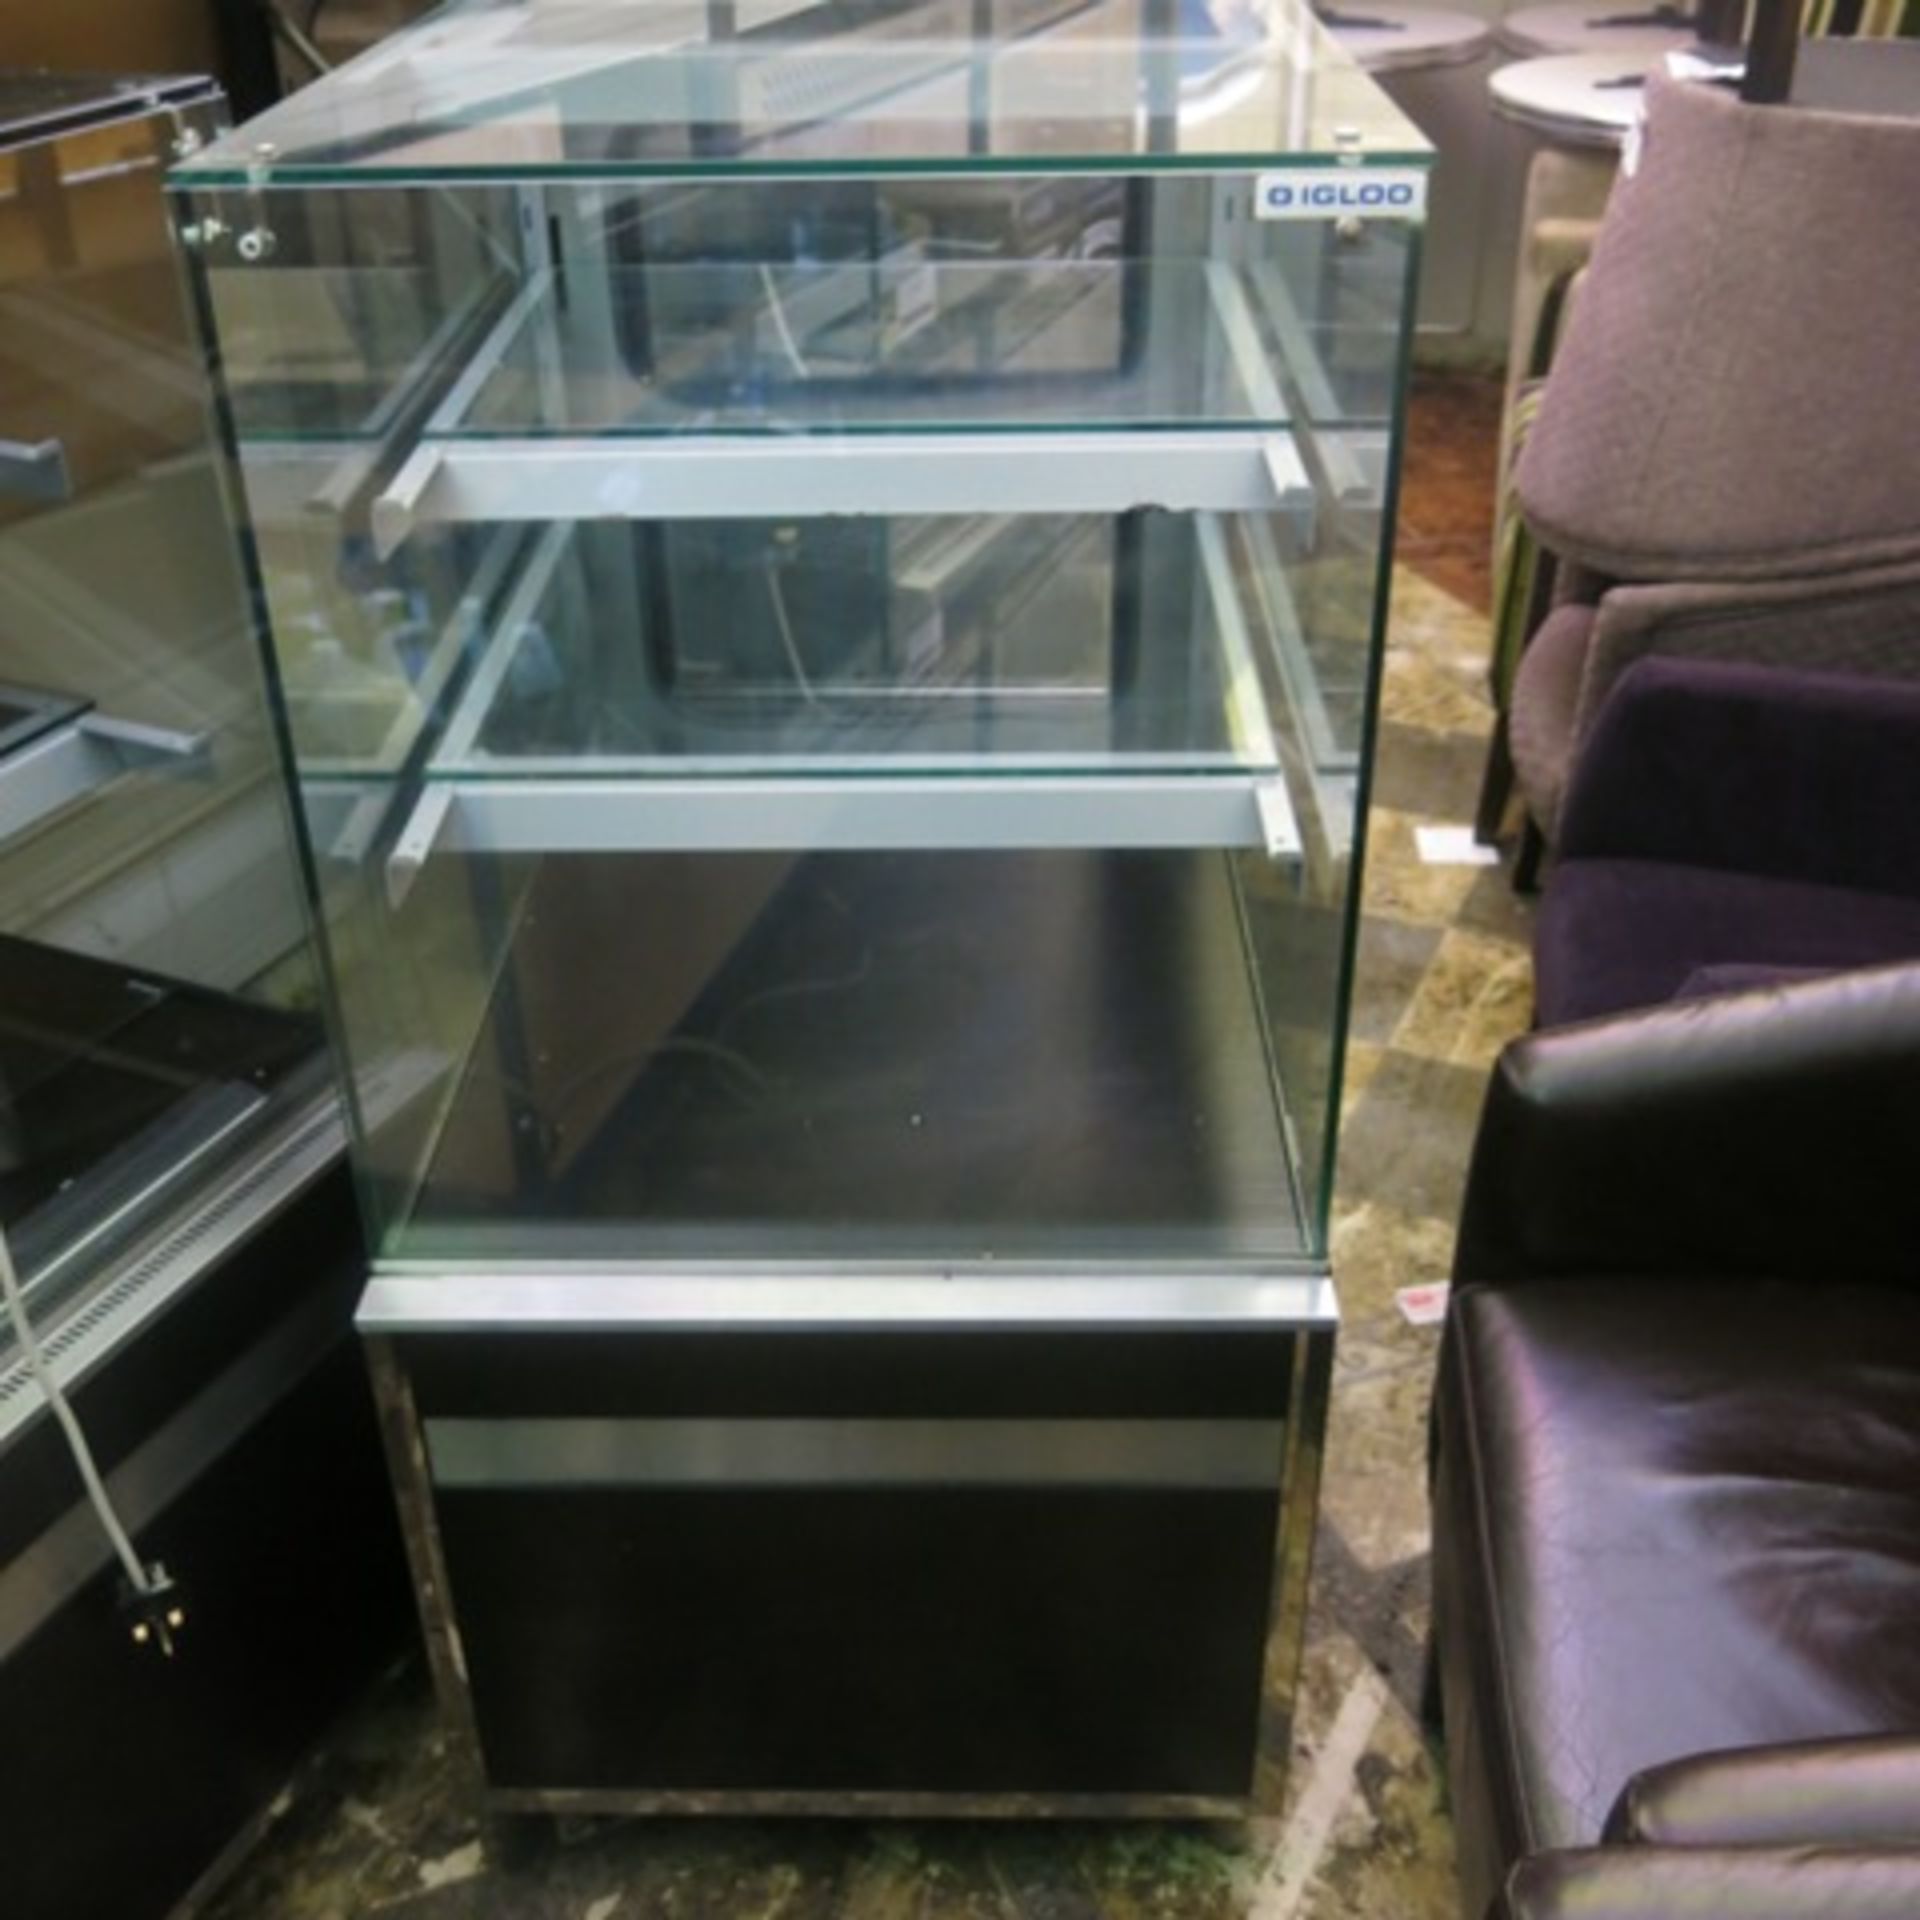 Igloo Refrigerated Glass Display Cabinet with 2 Glass Shelves, Model Gastroline Cube 0.6W. Size (H) - Image 9 of 10